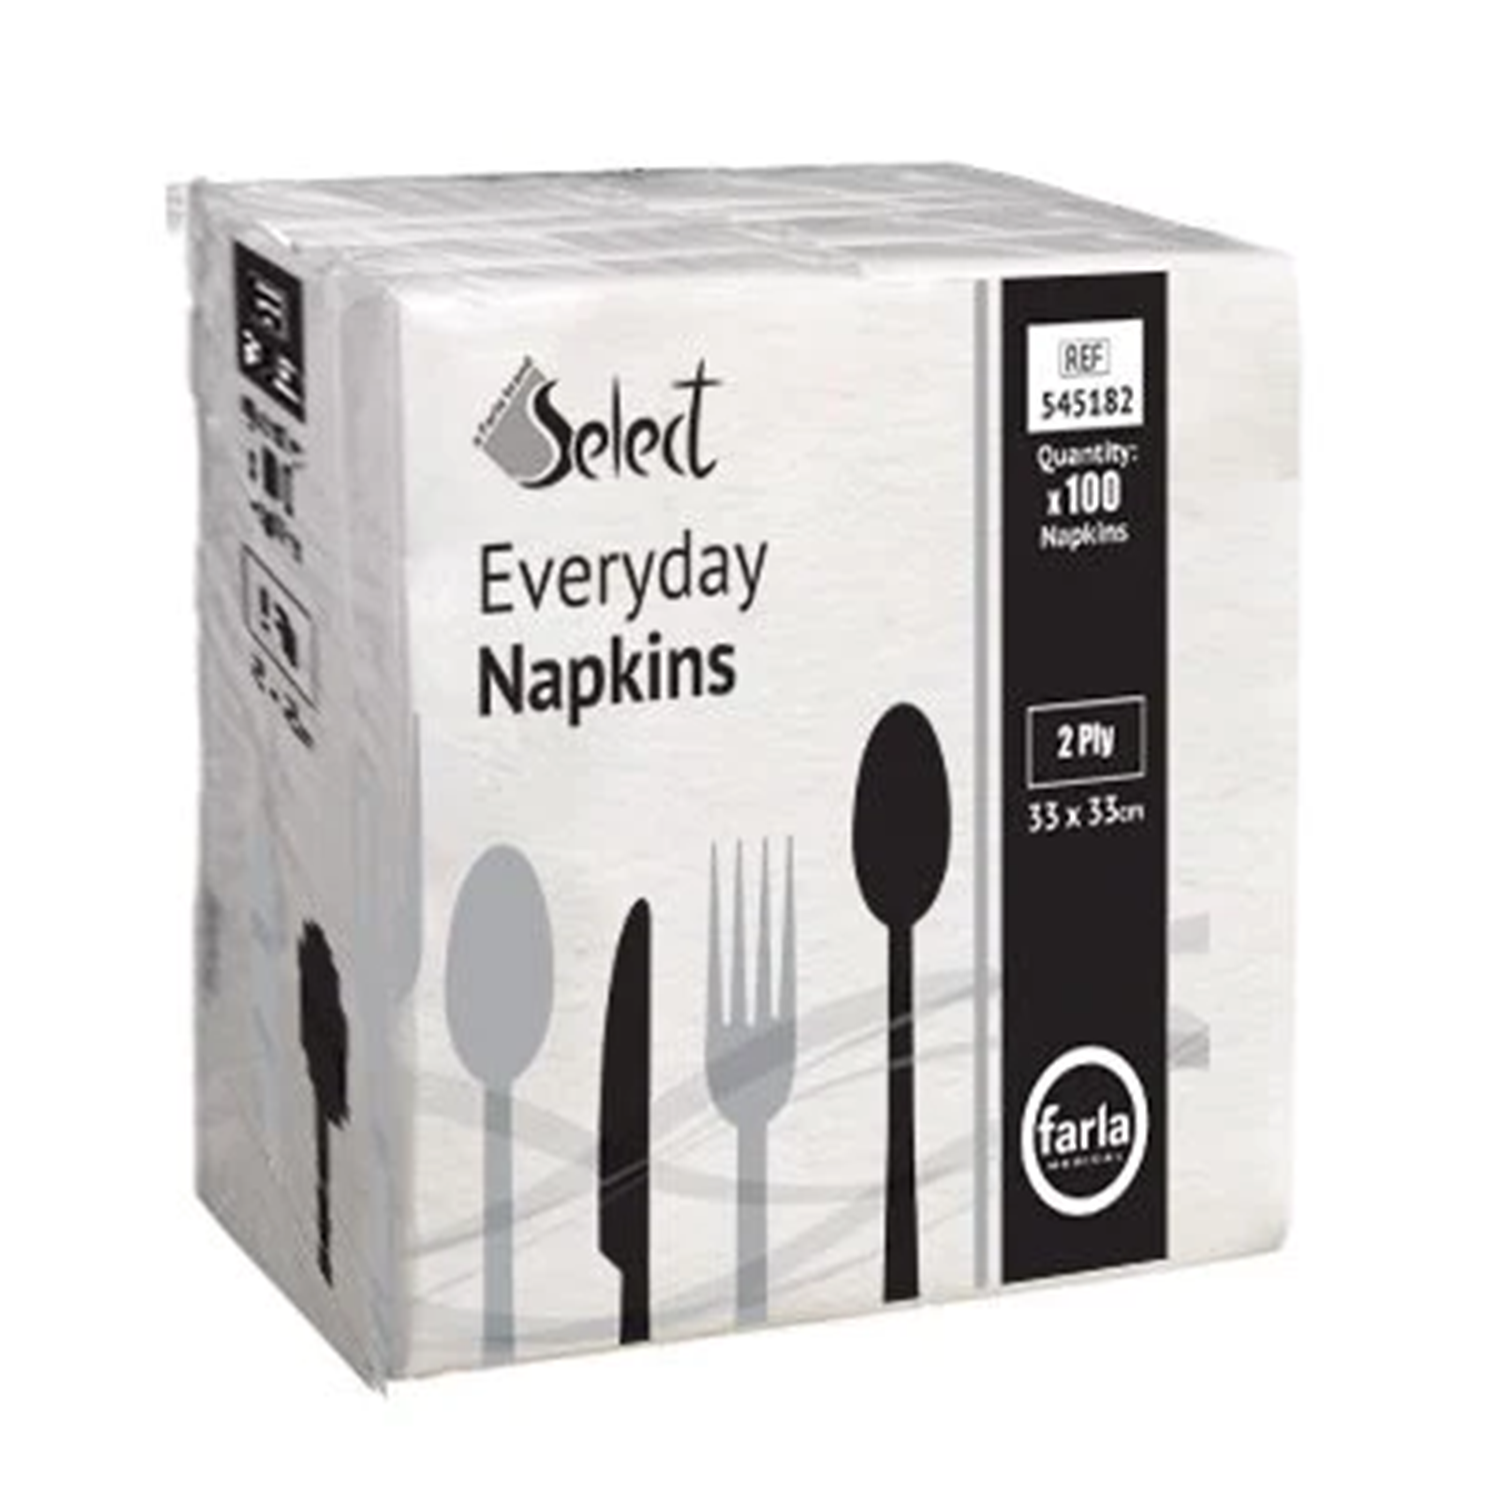 Select Everyday Napkins | White | Pack of 100